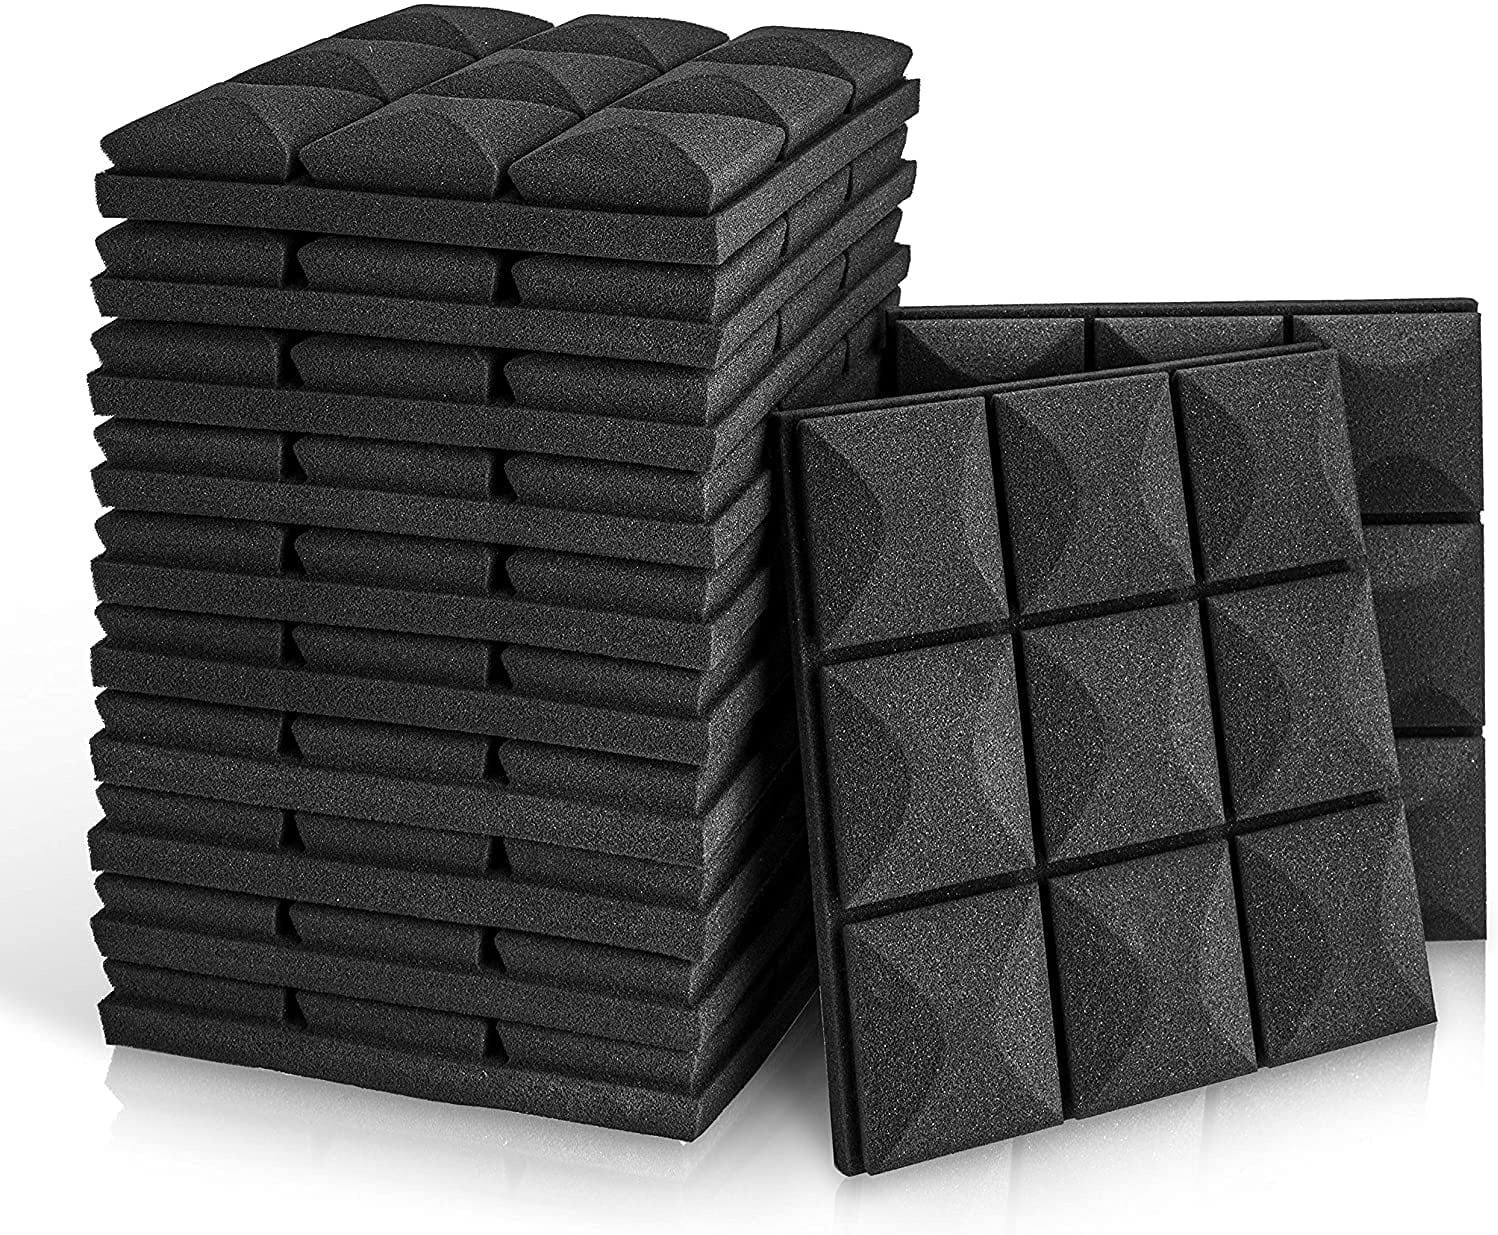 2 X 12 X 12 Acoustic Panels Sounds Absorbing Foam Padding for Decreasing Noise and Echoes Soundproof Foam for indoor Pyramid Type Kuchoow 12 Pack Sound Proof Foam Panels for Walls 